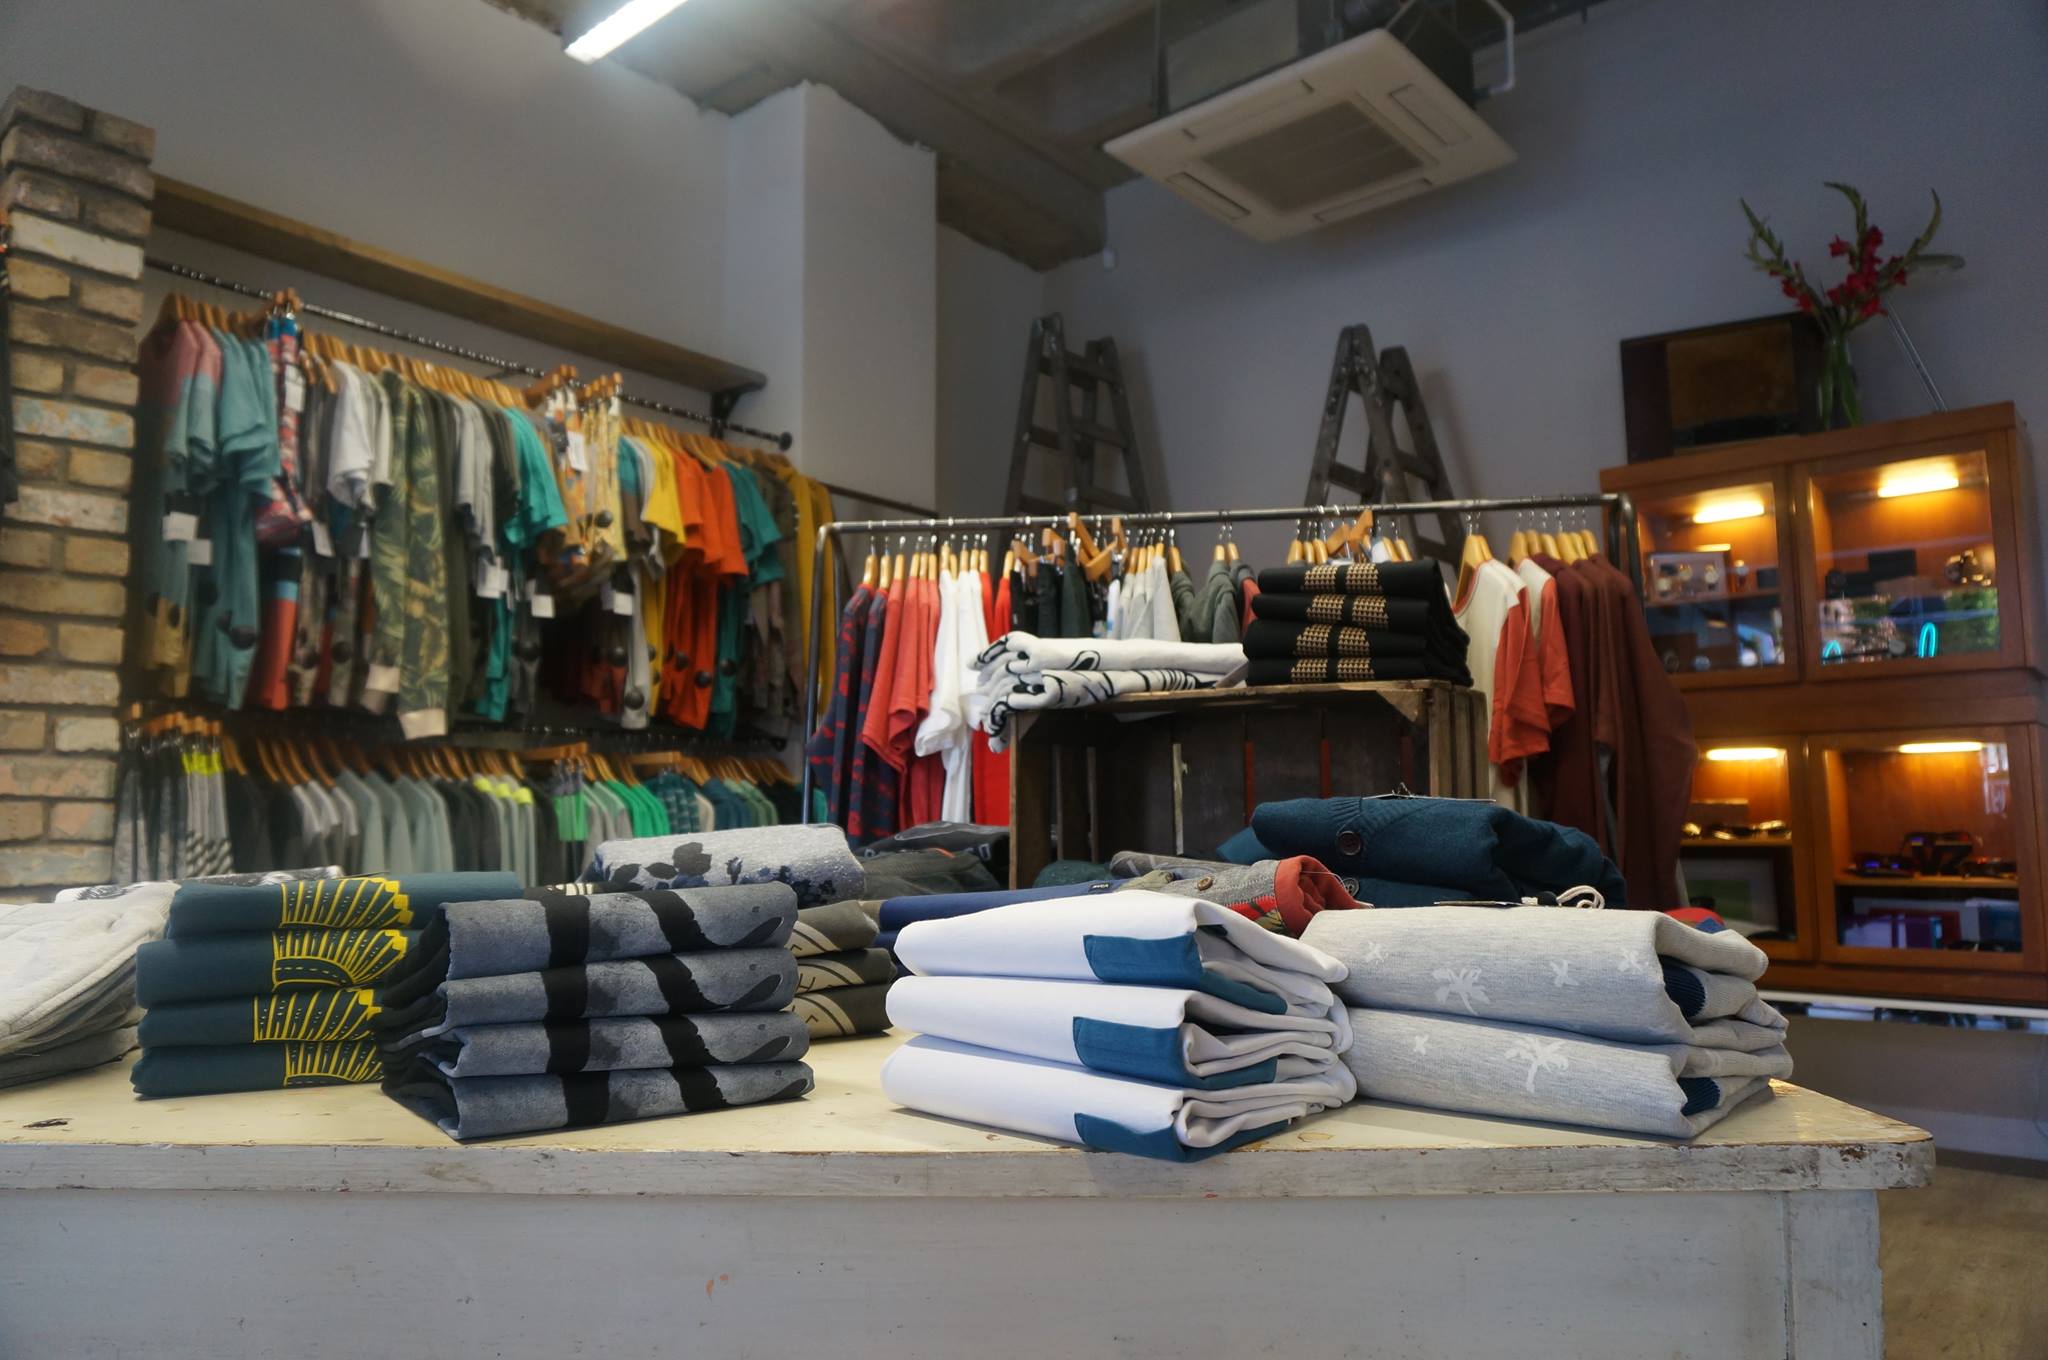 Raglan Clothing and Coffeeshop Fit-Out